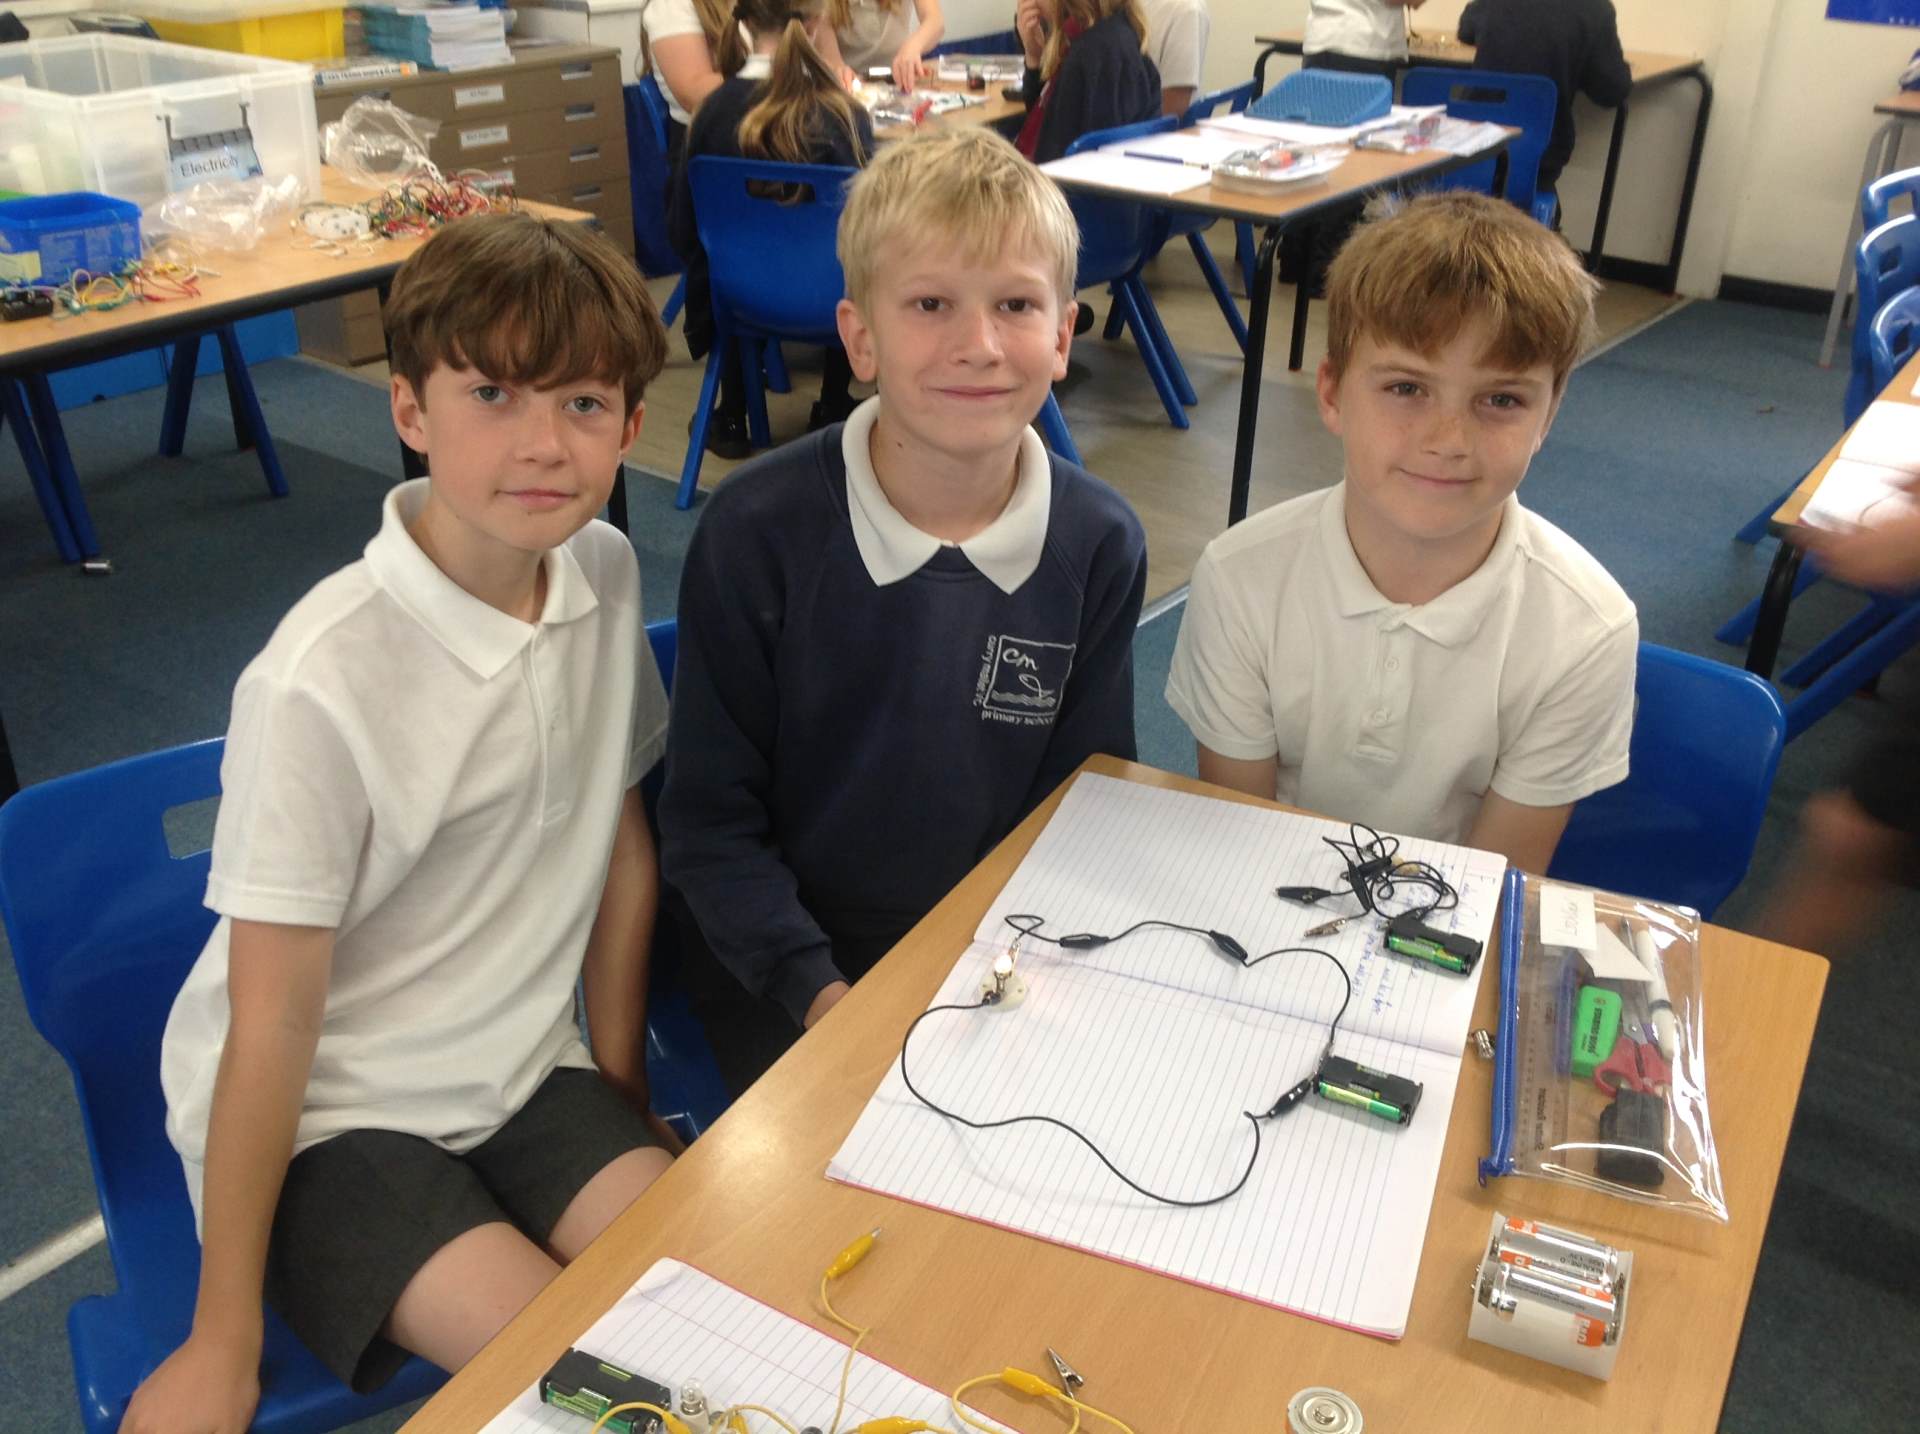 Constructing a simple circuit.